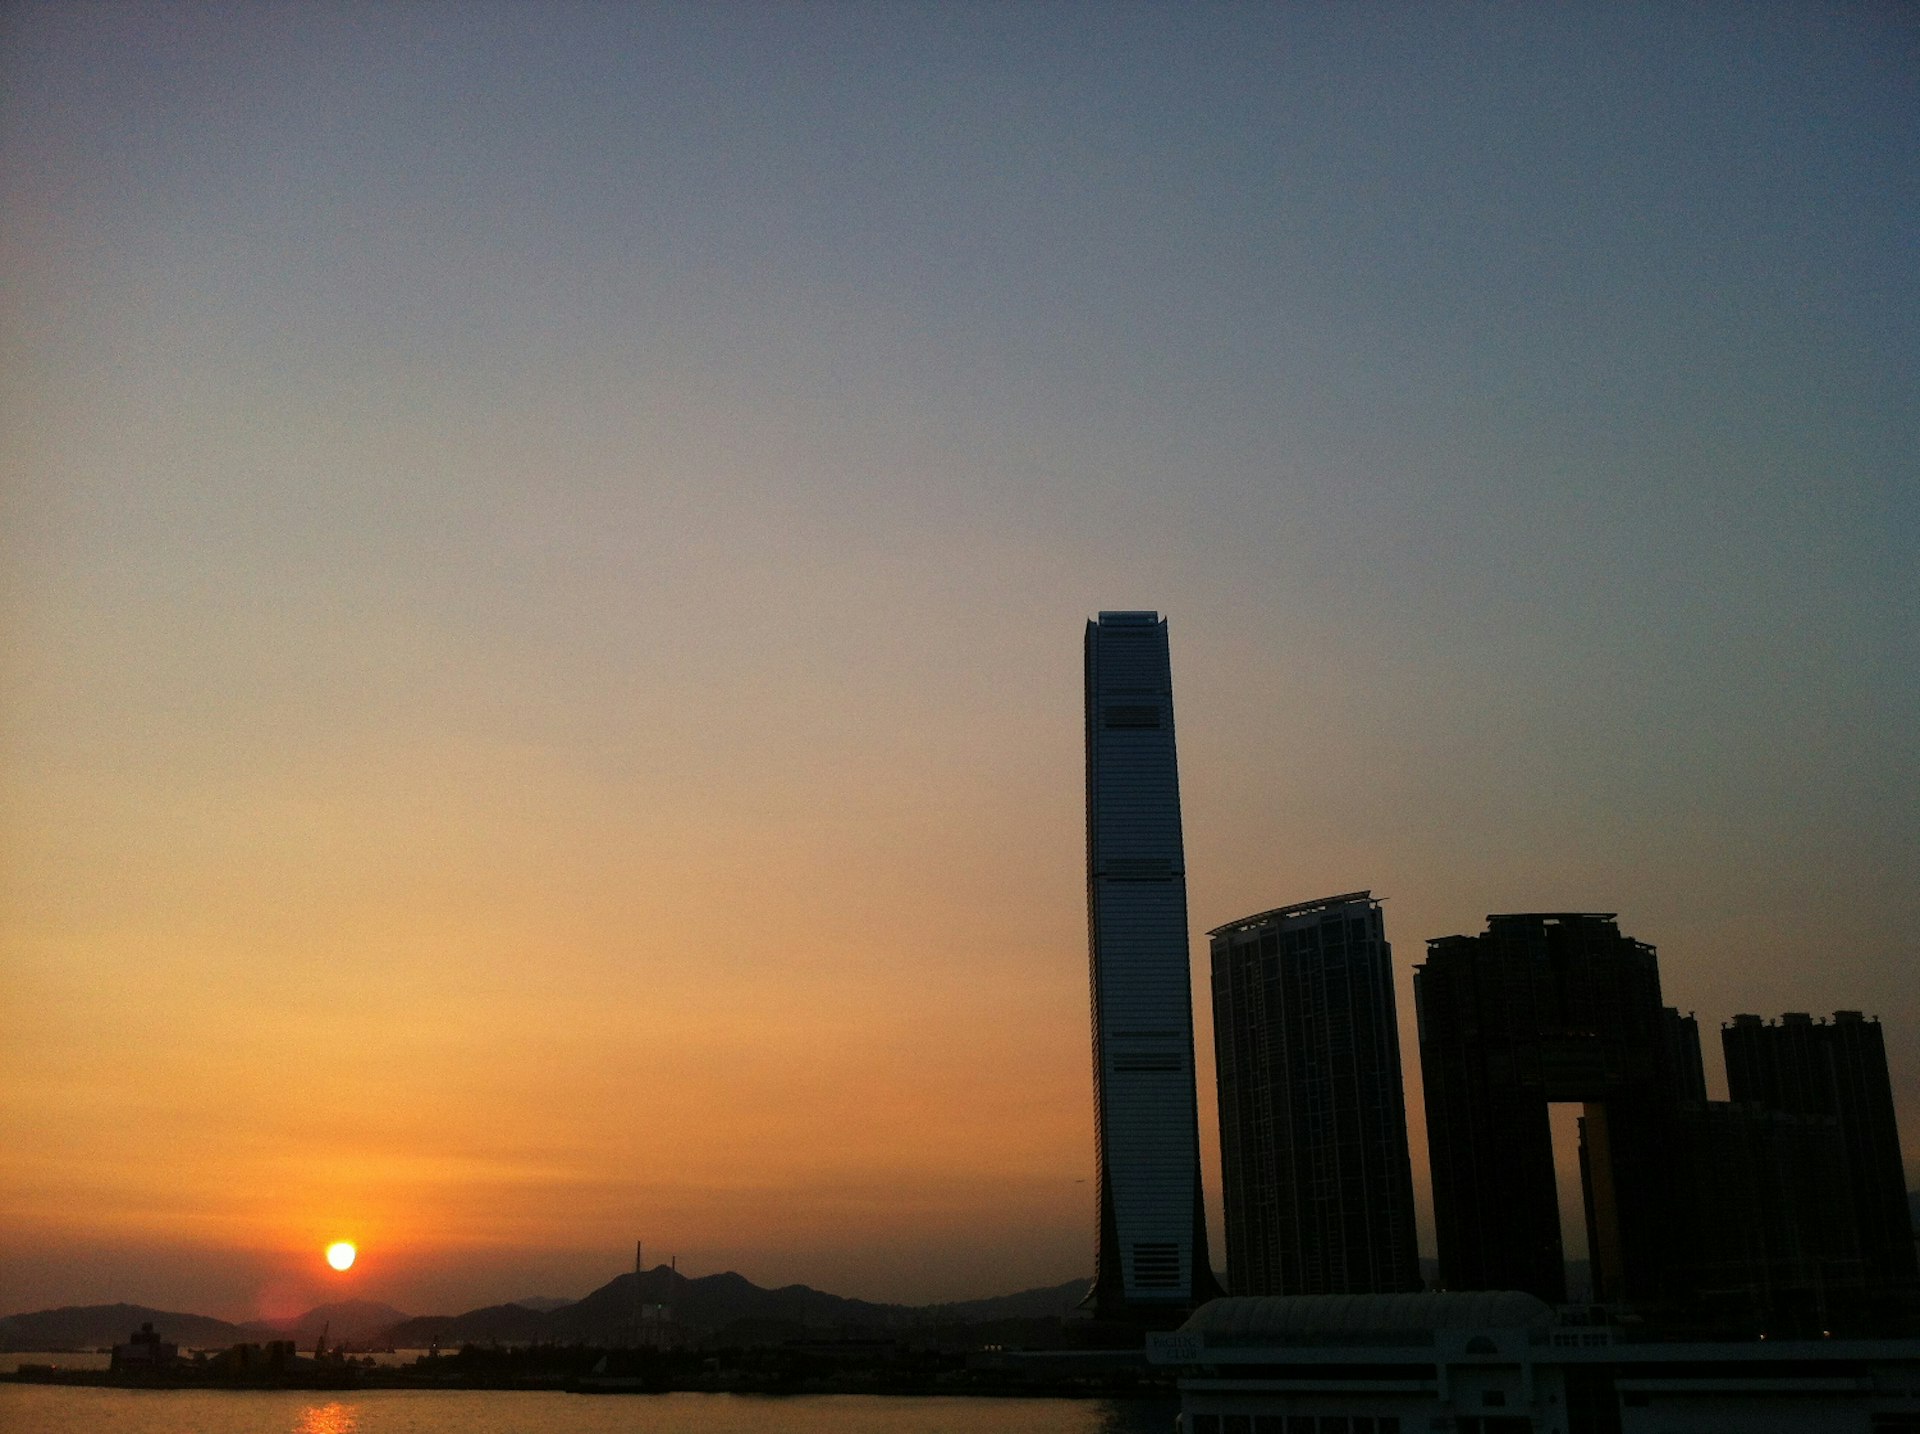 Sunset over the Harbour City car park. Image by Piera Chen / Lonely Planet